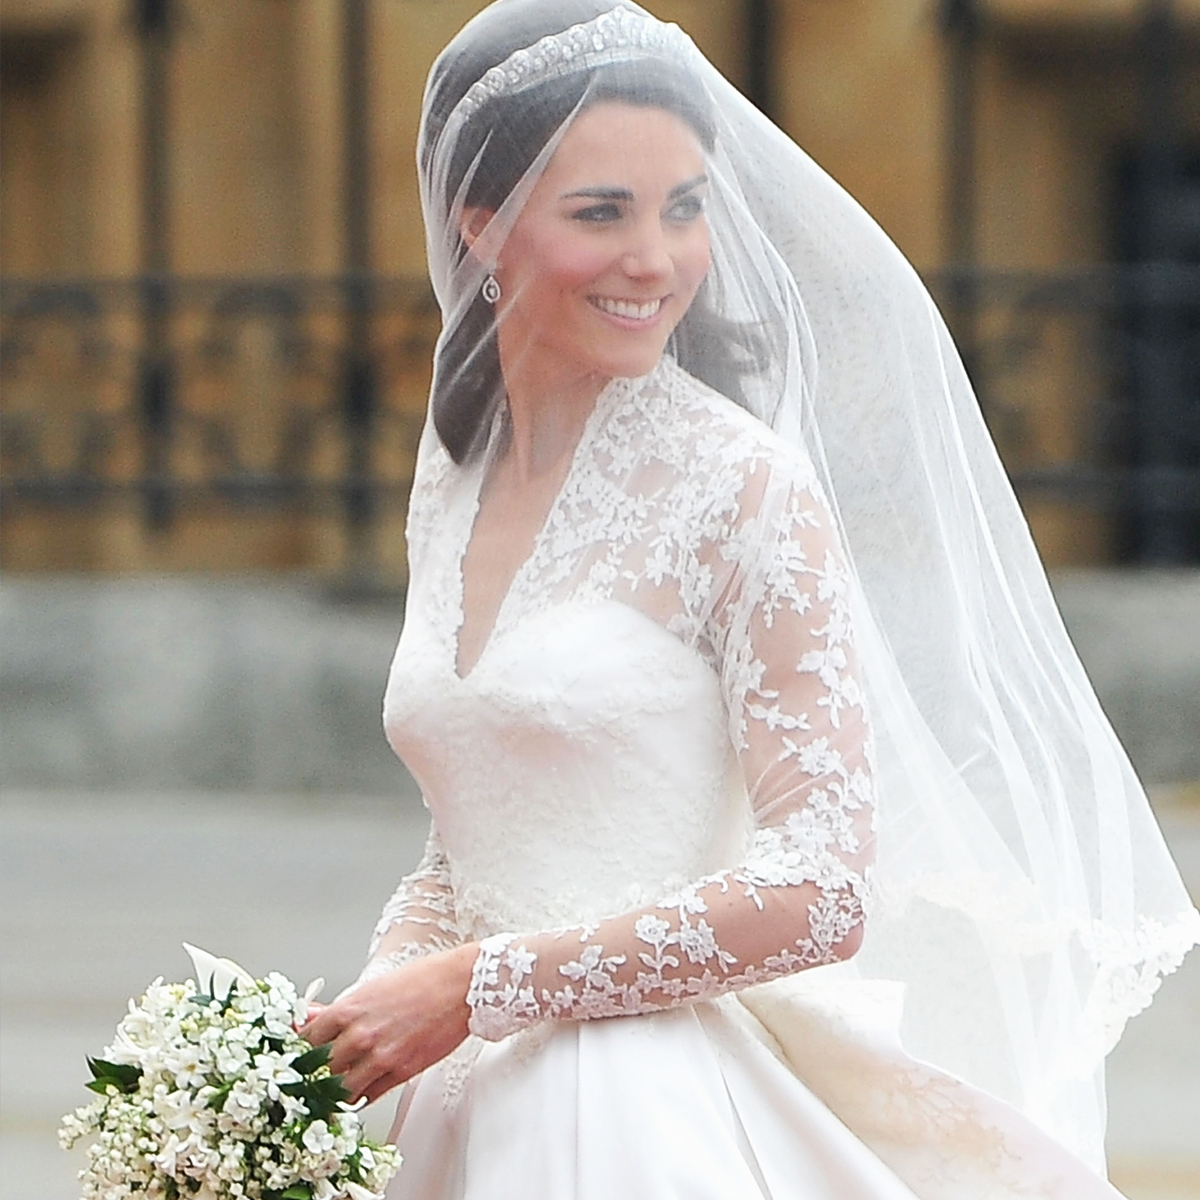 The Most Expensive Royal Wedding Dresses